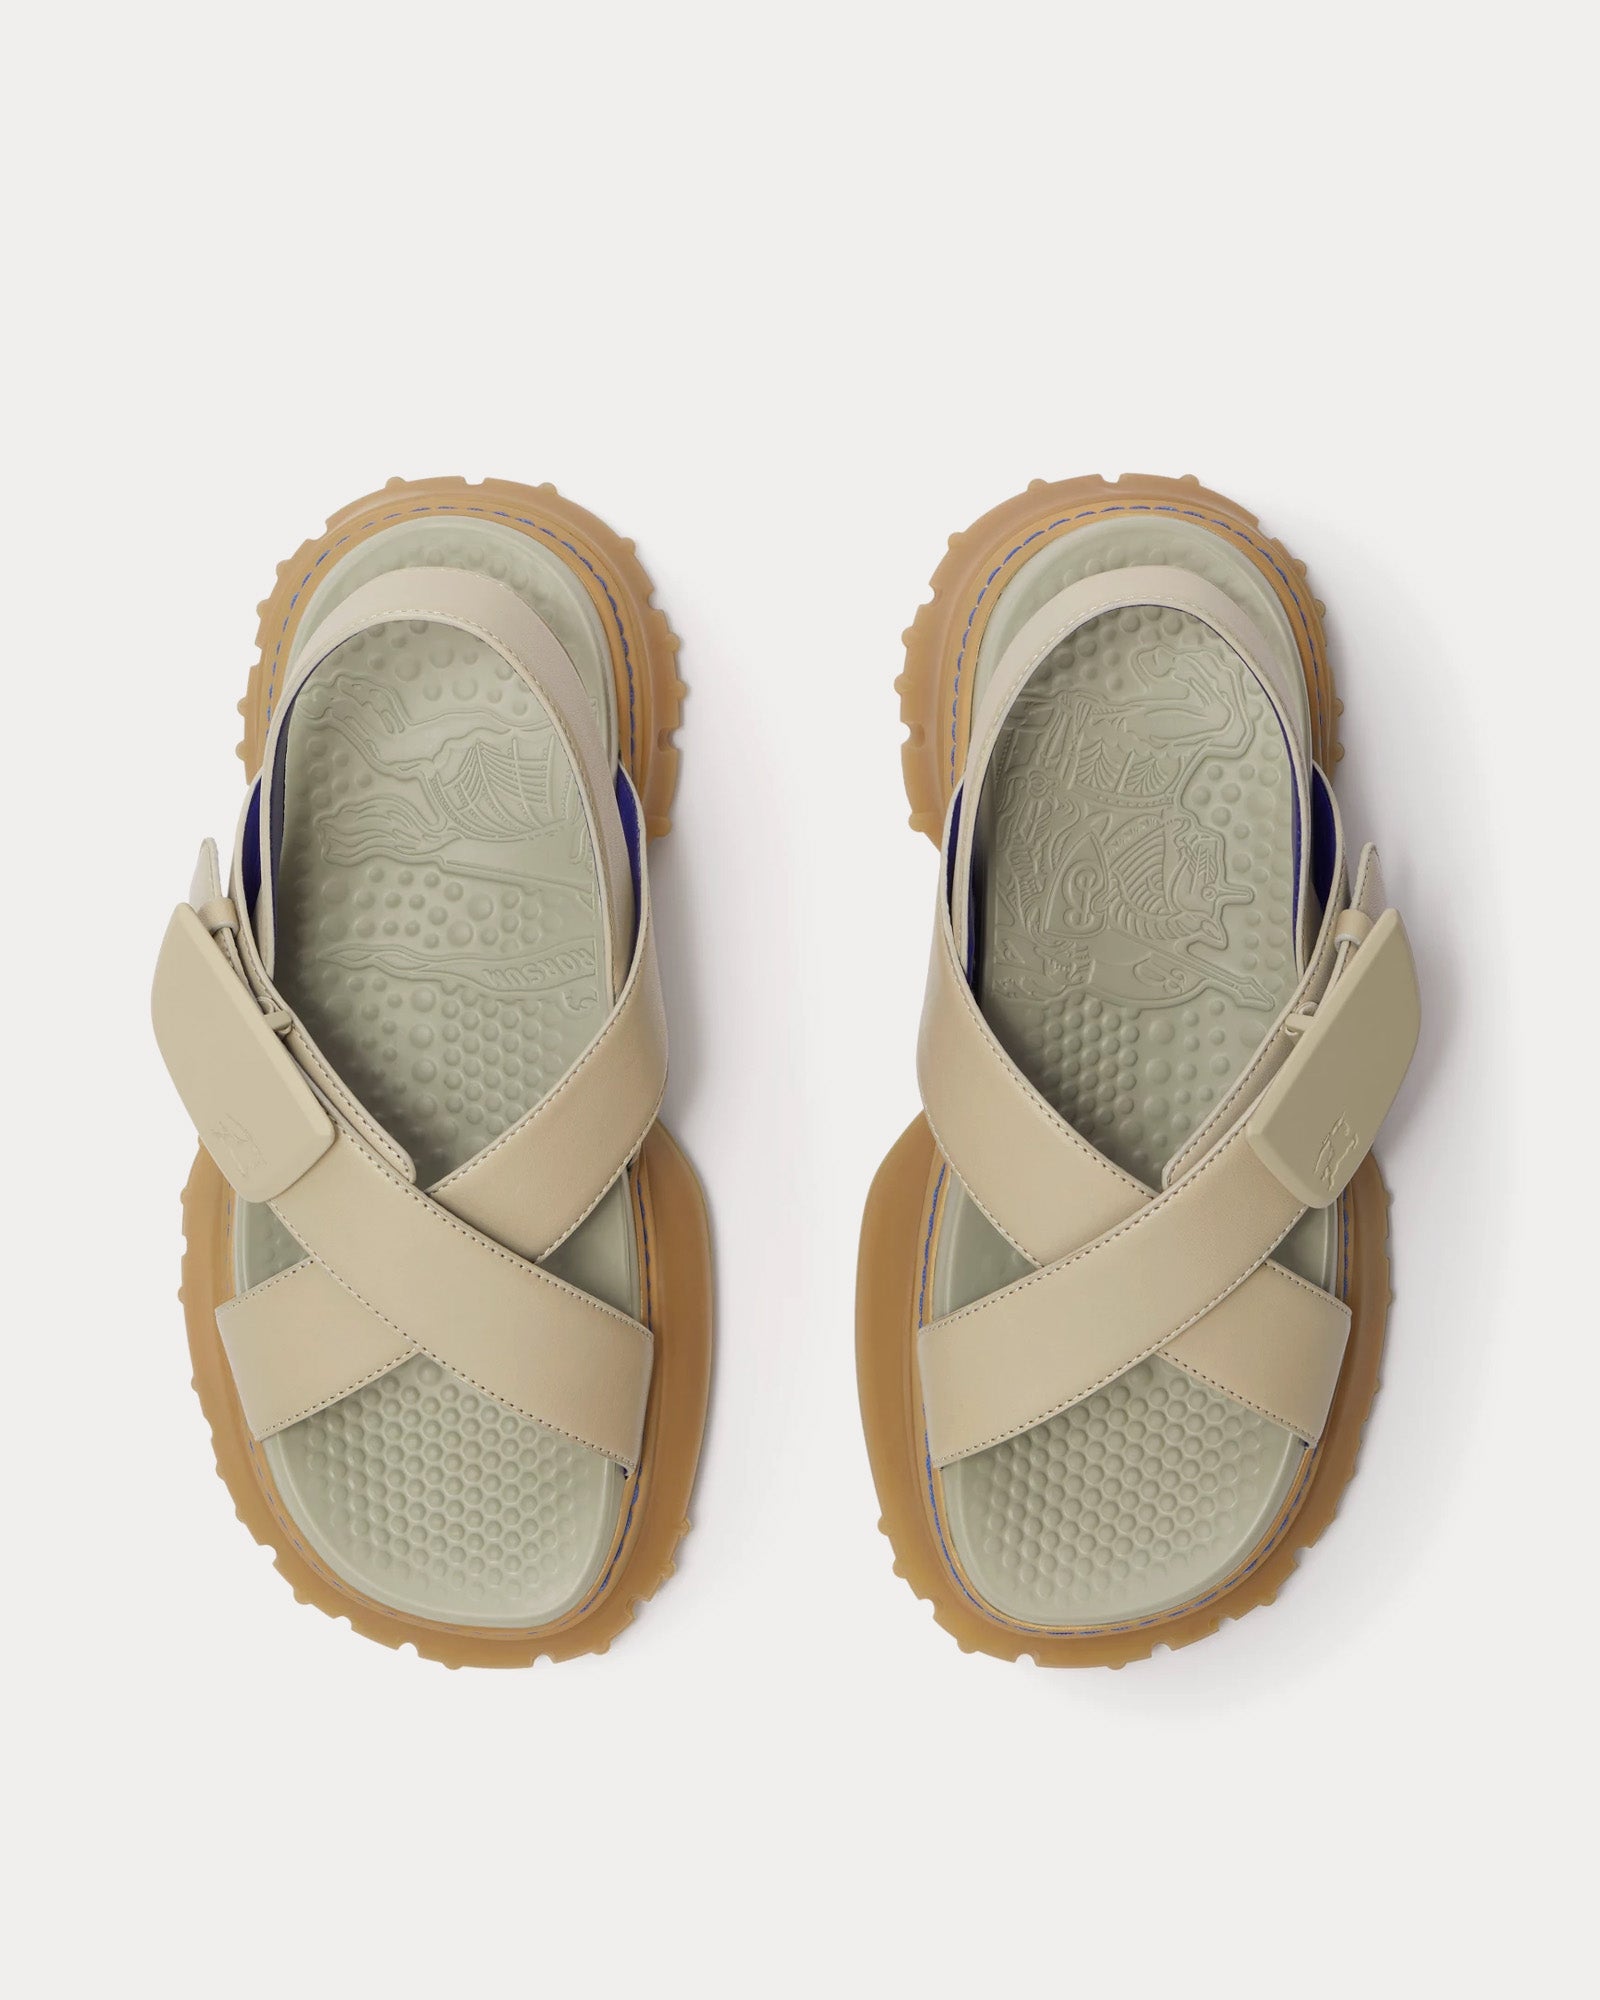 Burberry - Pebble Leather Field Sandals